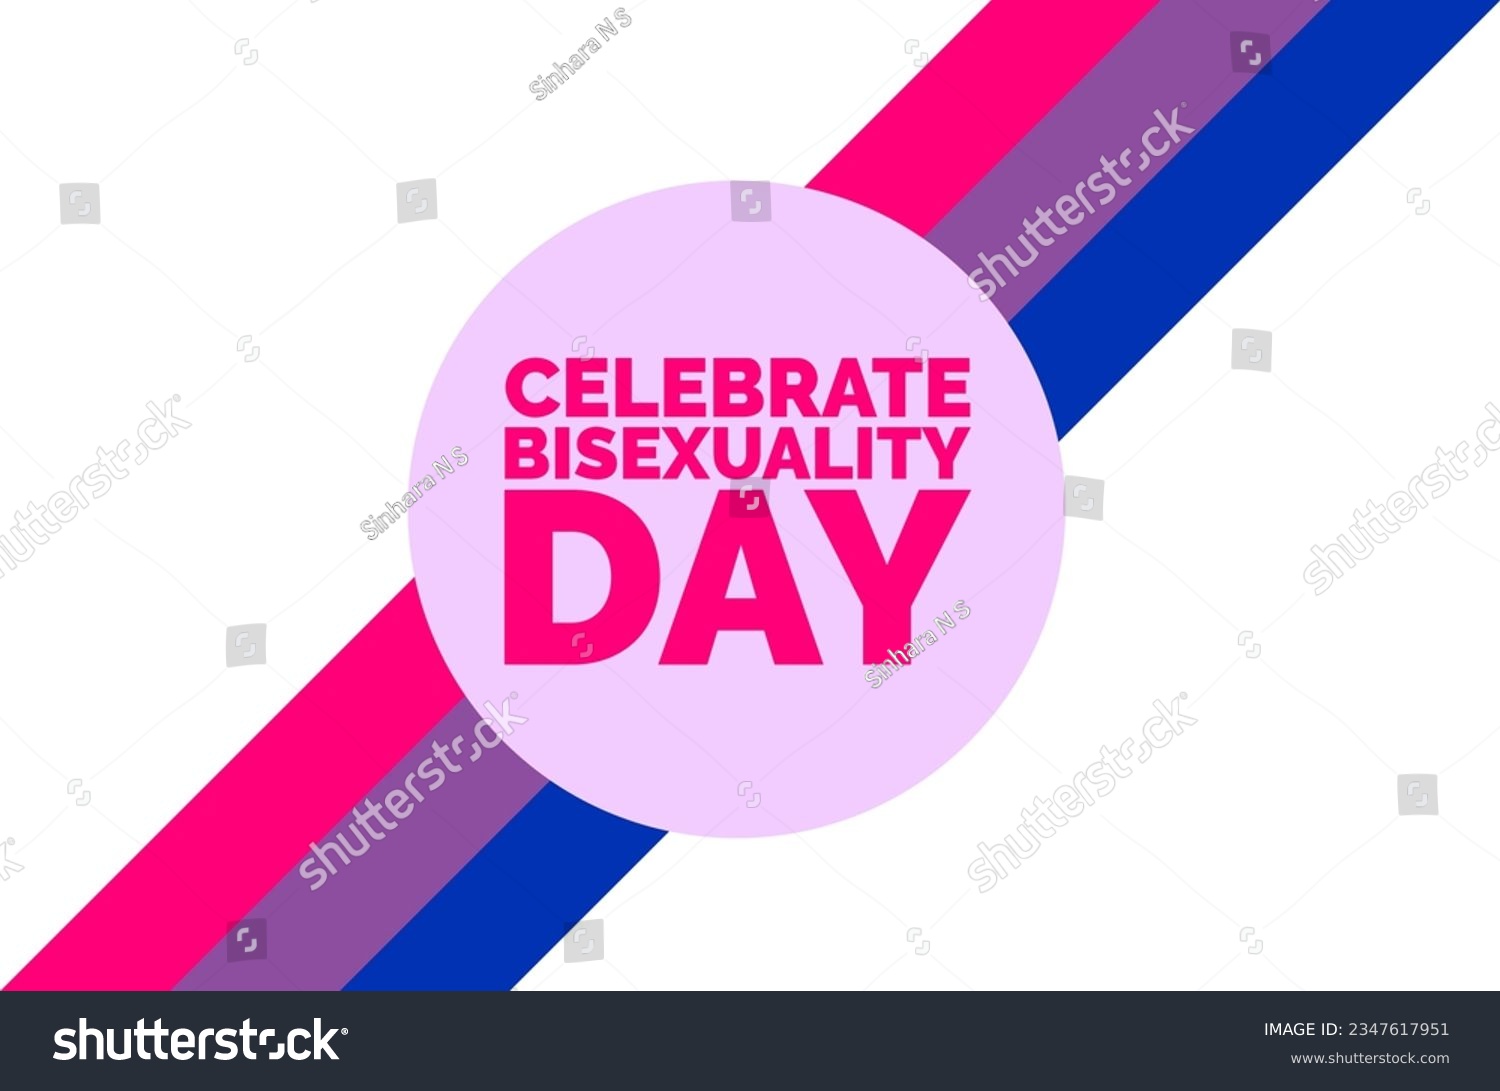 Bisexual Pride Day.Celebrate Bisexuality Day. Royalty Free Stock